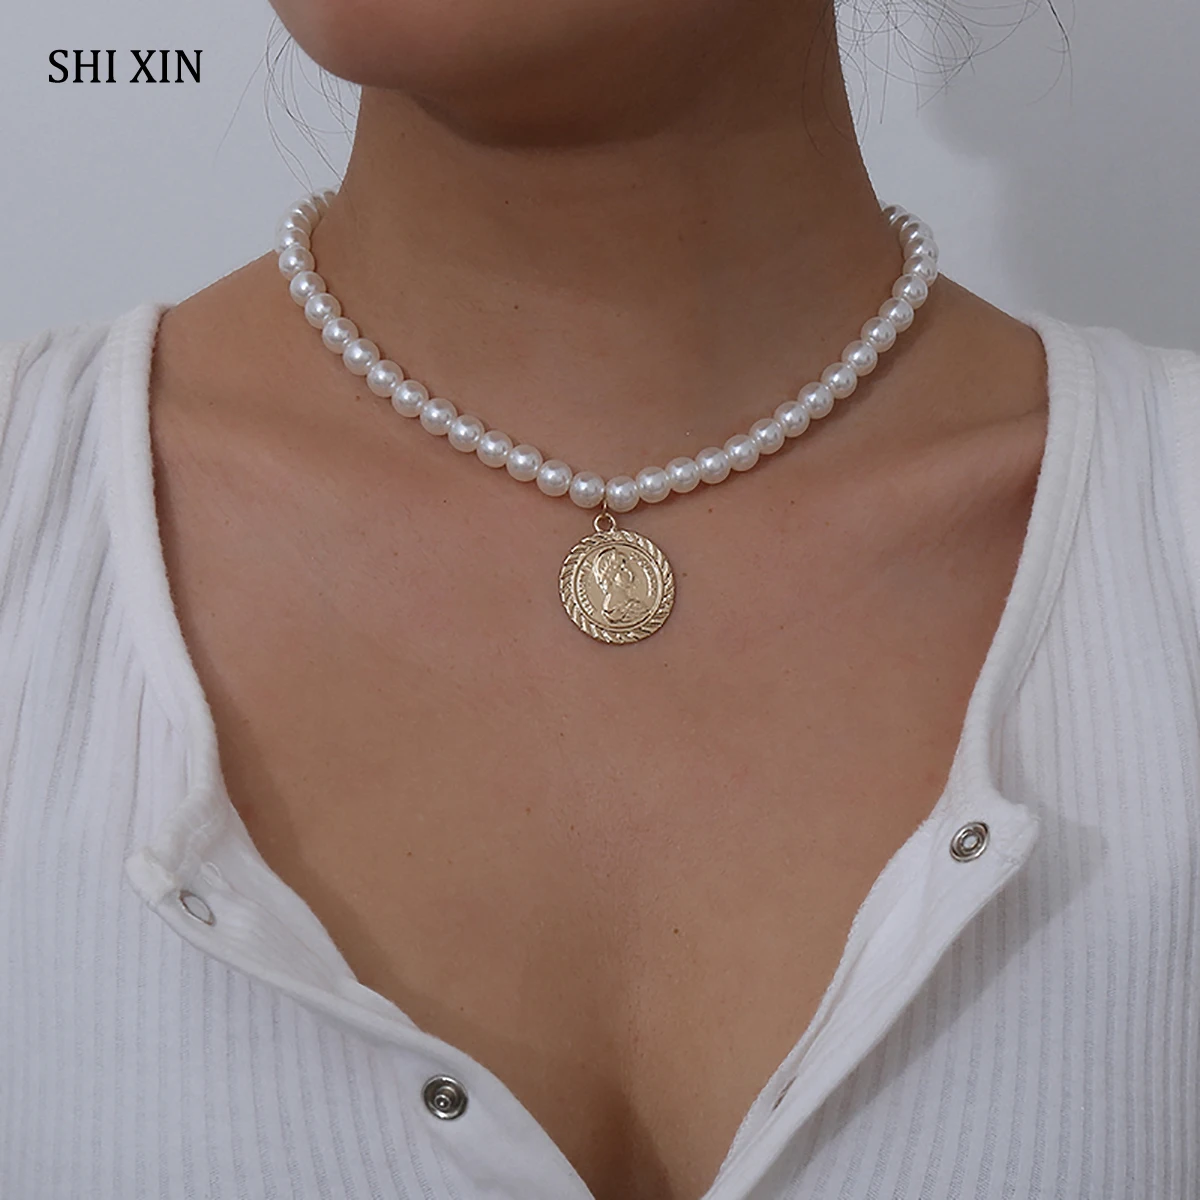 SHIXIN Charms Imitation Pearl Choker Necklace for Women Fashion Short Colar With Big Coin Pendants Necklaces 2020 Jewelry | Украшения и